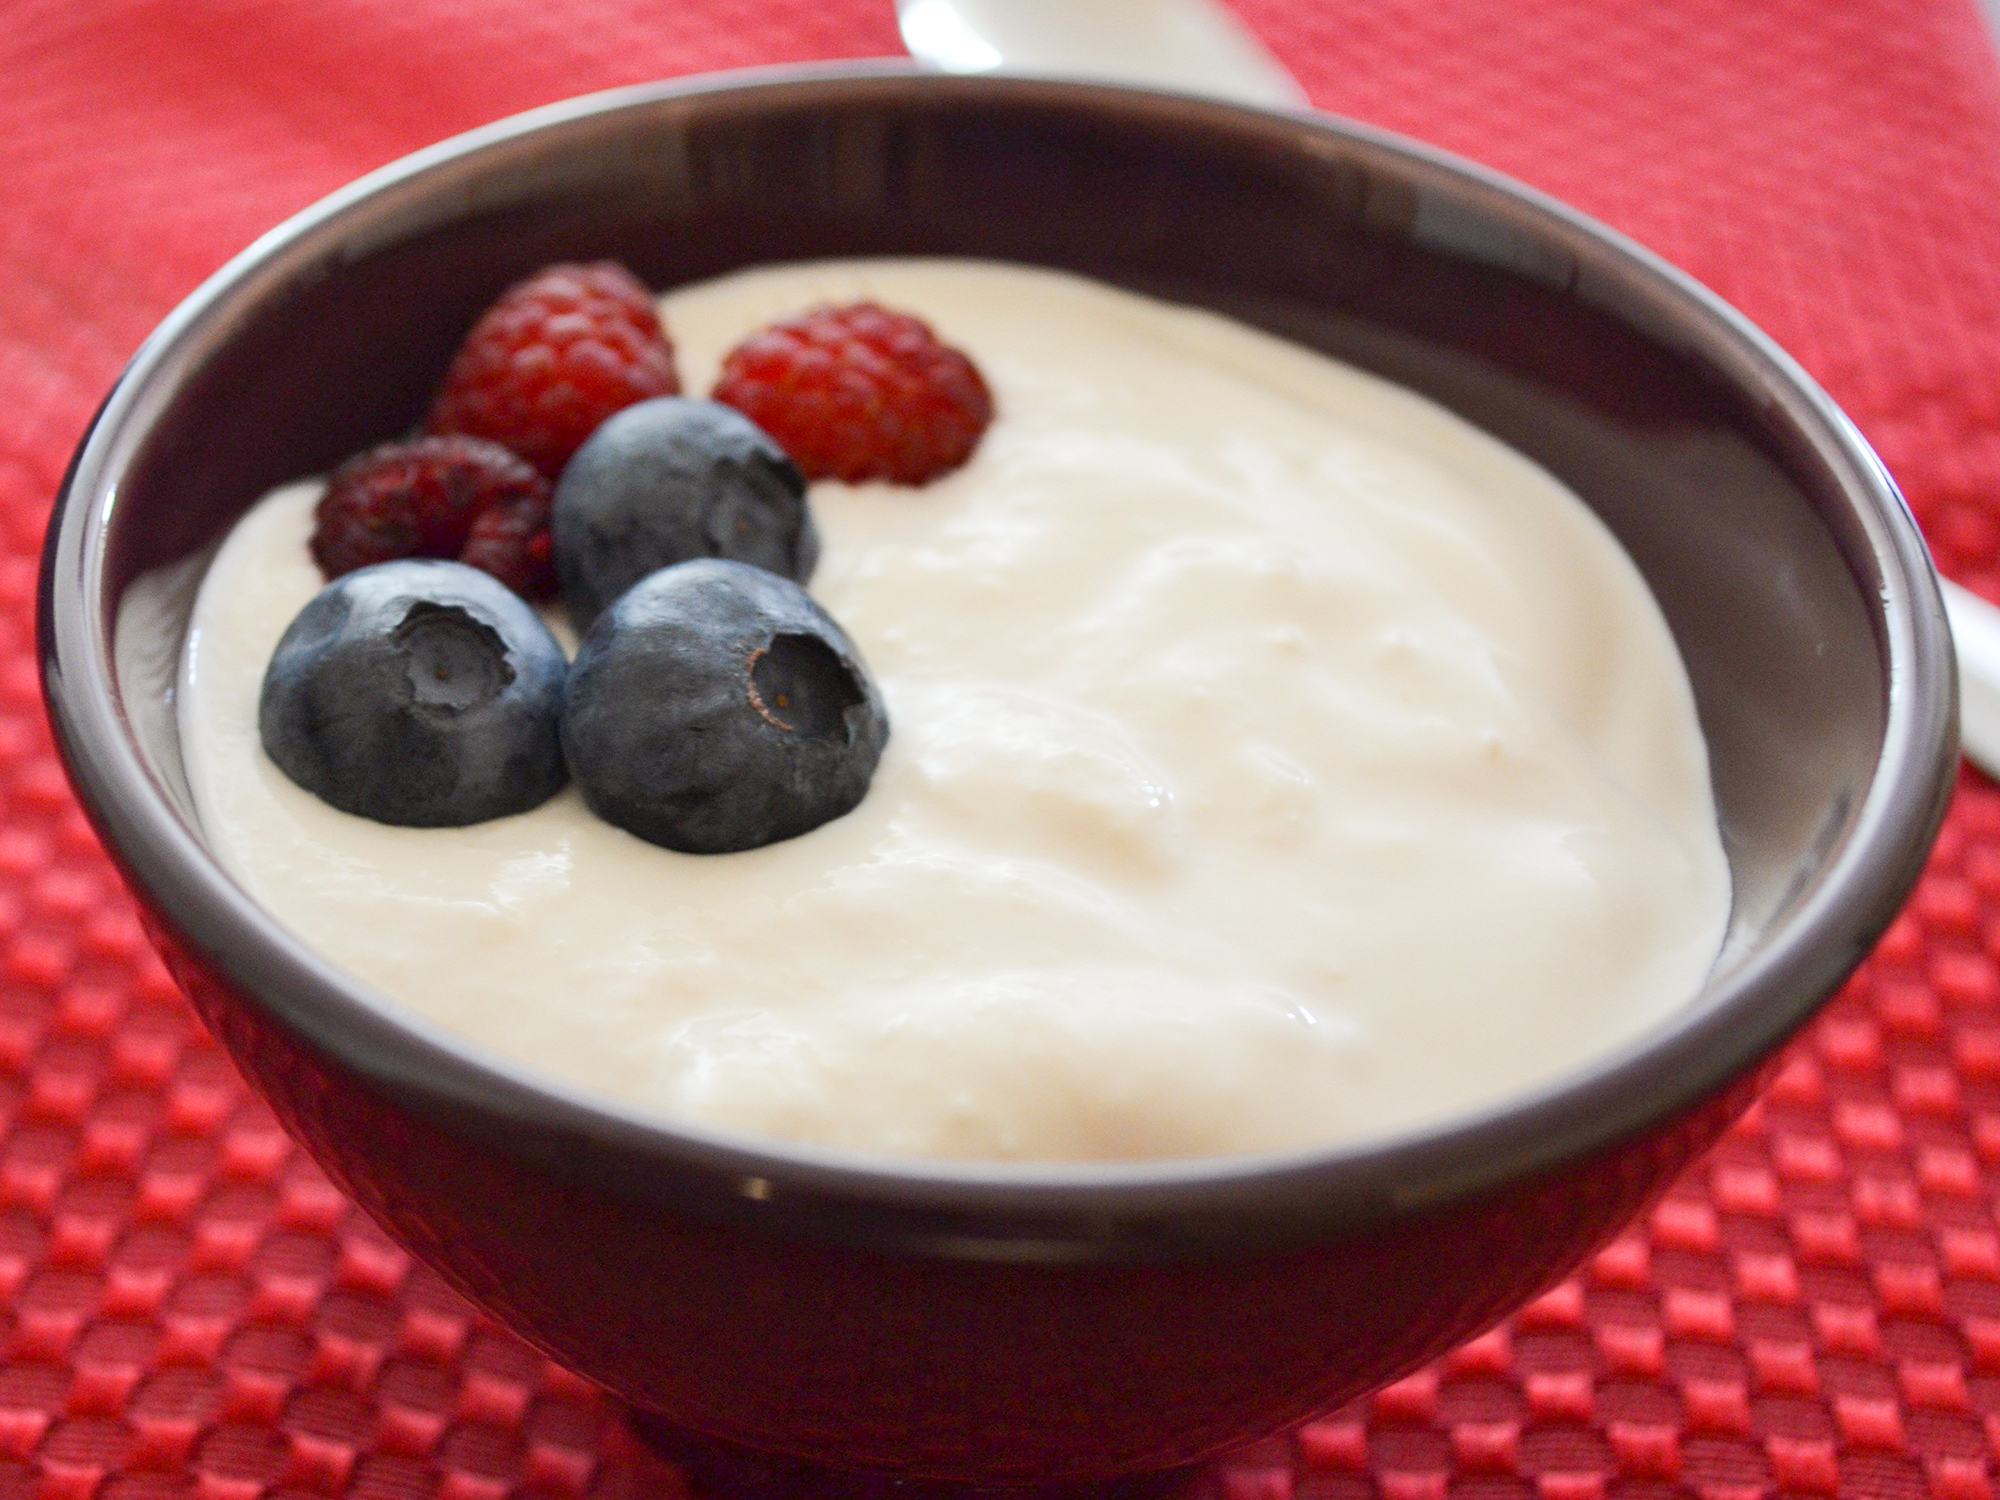 close up view of Yogurt garnished with blueberries and raspberries in a black bowl